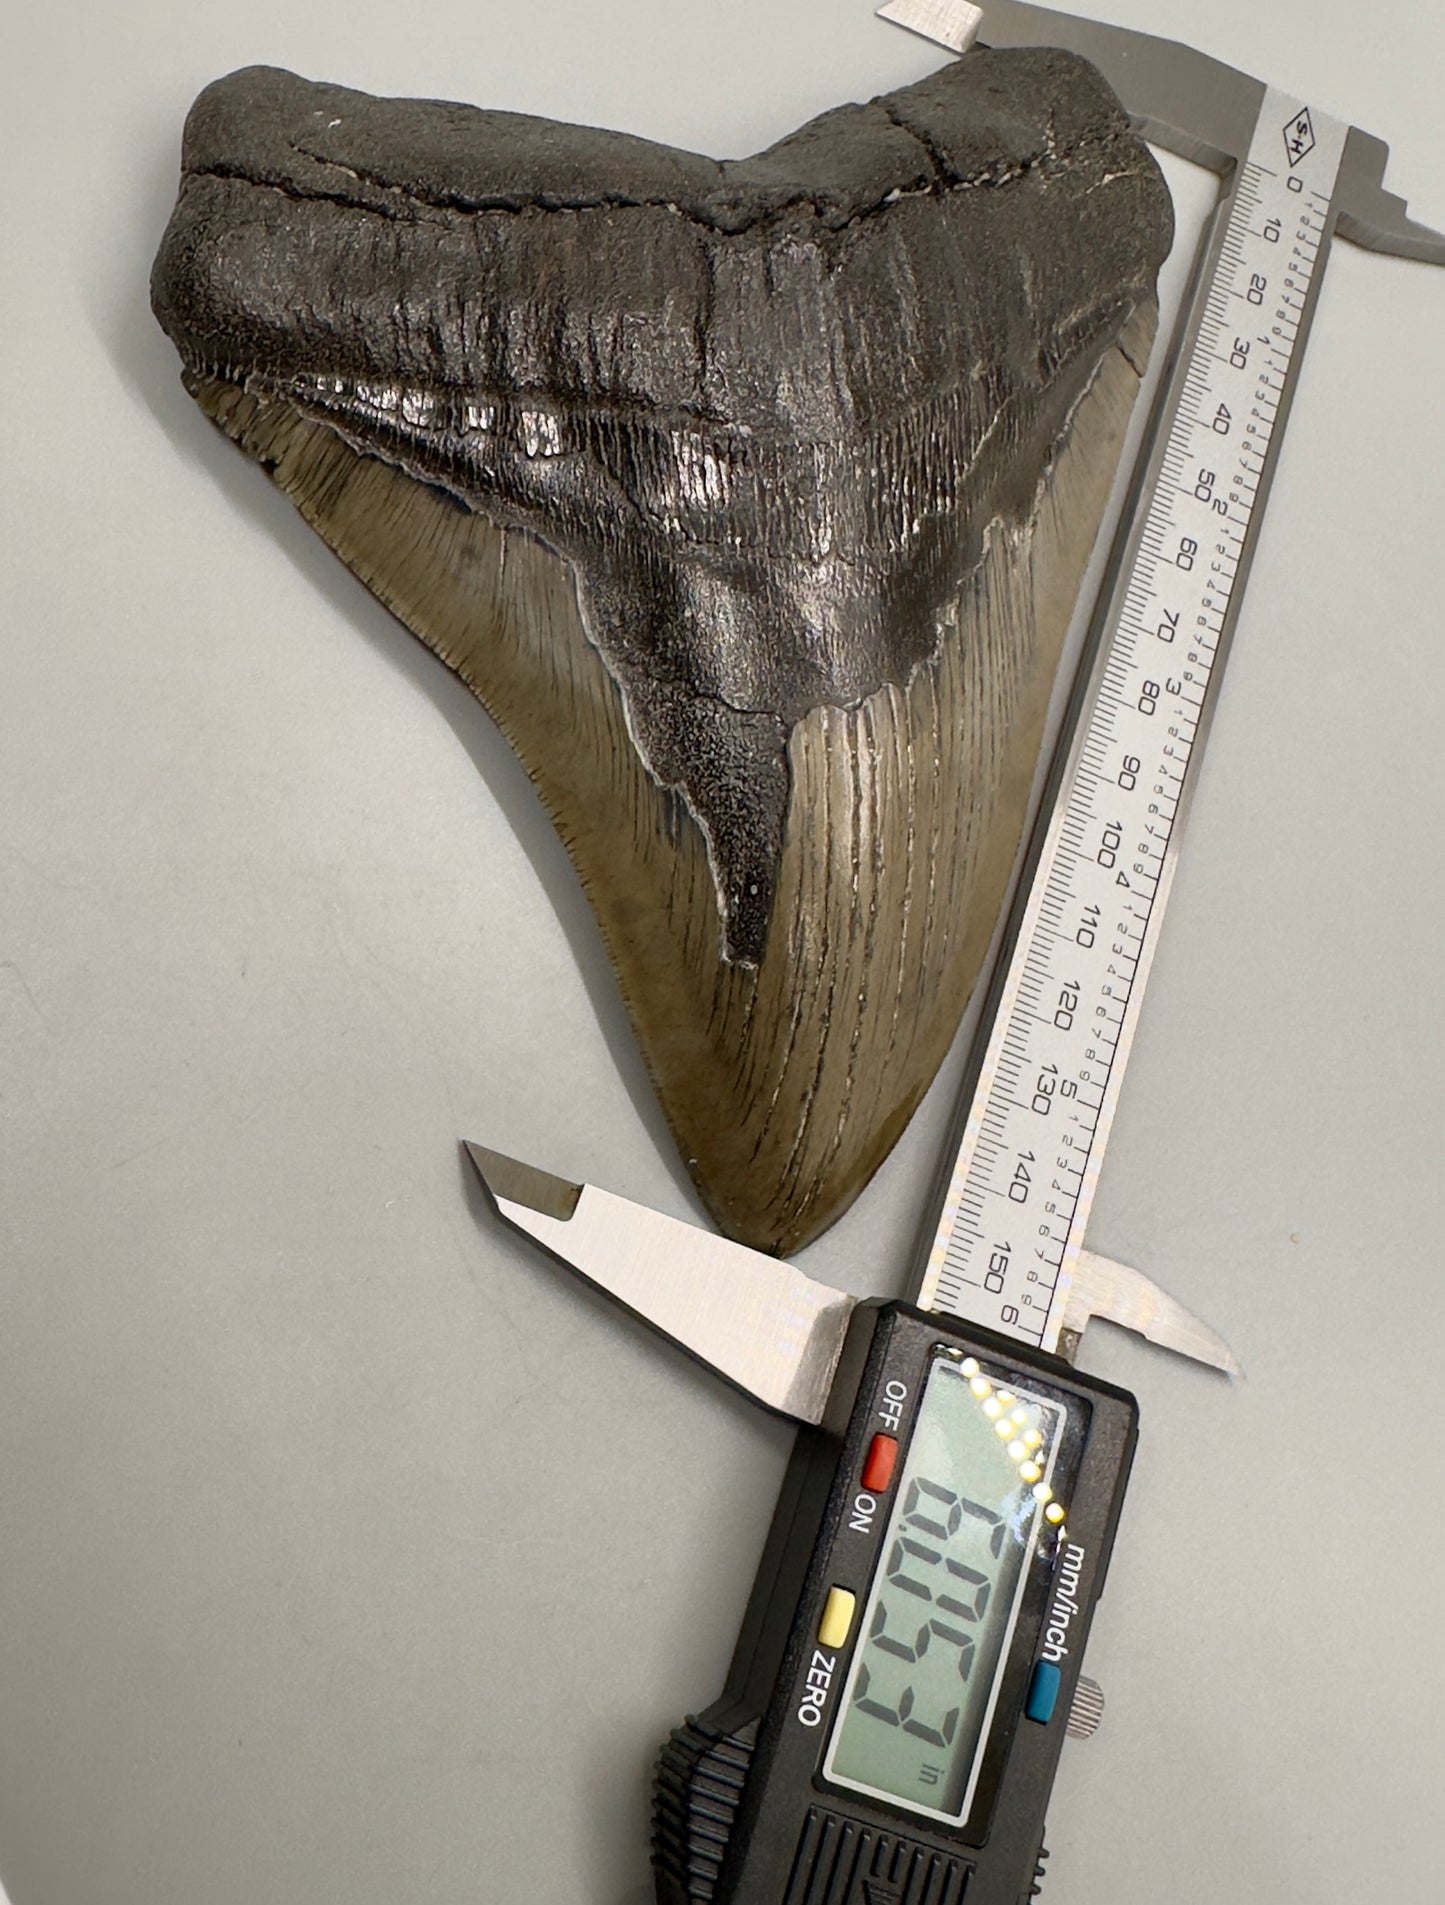 EXTRA LARGE 6.05" Fossil Megalodon Tooth: Scuba Diving Discovery from Southeast USA CM4606 - Front with caliper